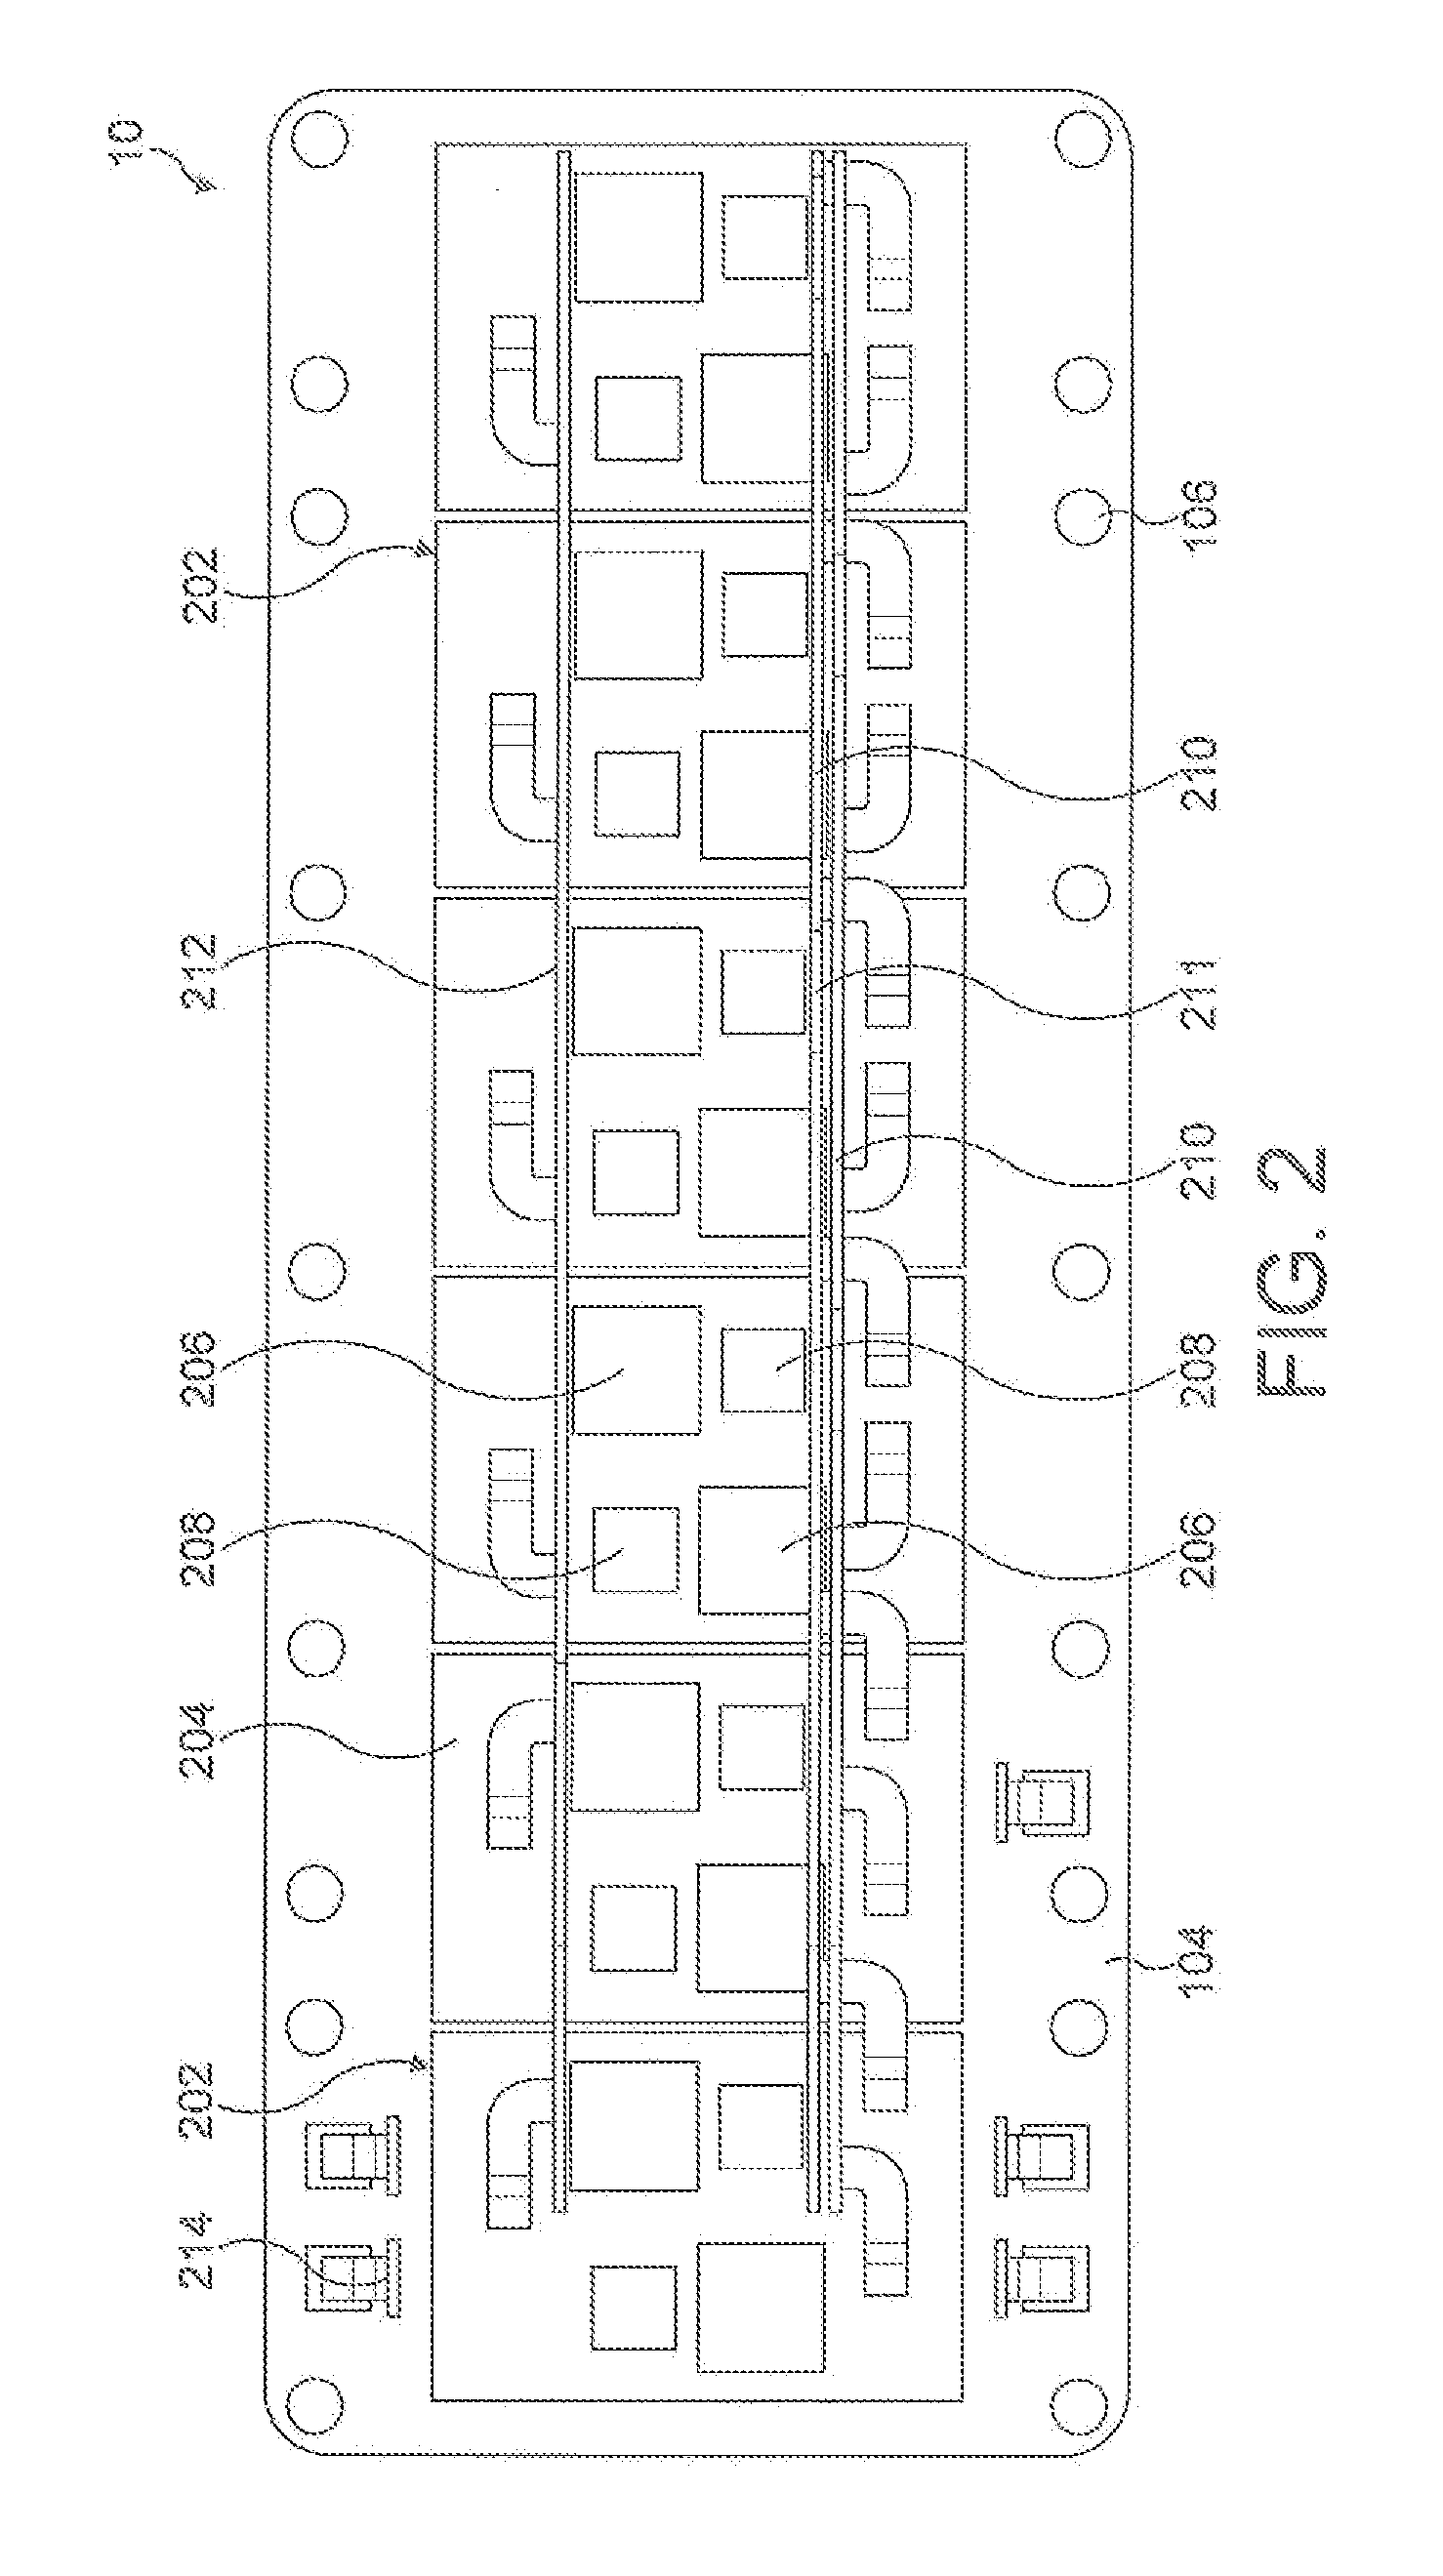 Optical sensor system and detecting method for an enclosed semiconductor device module